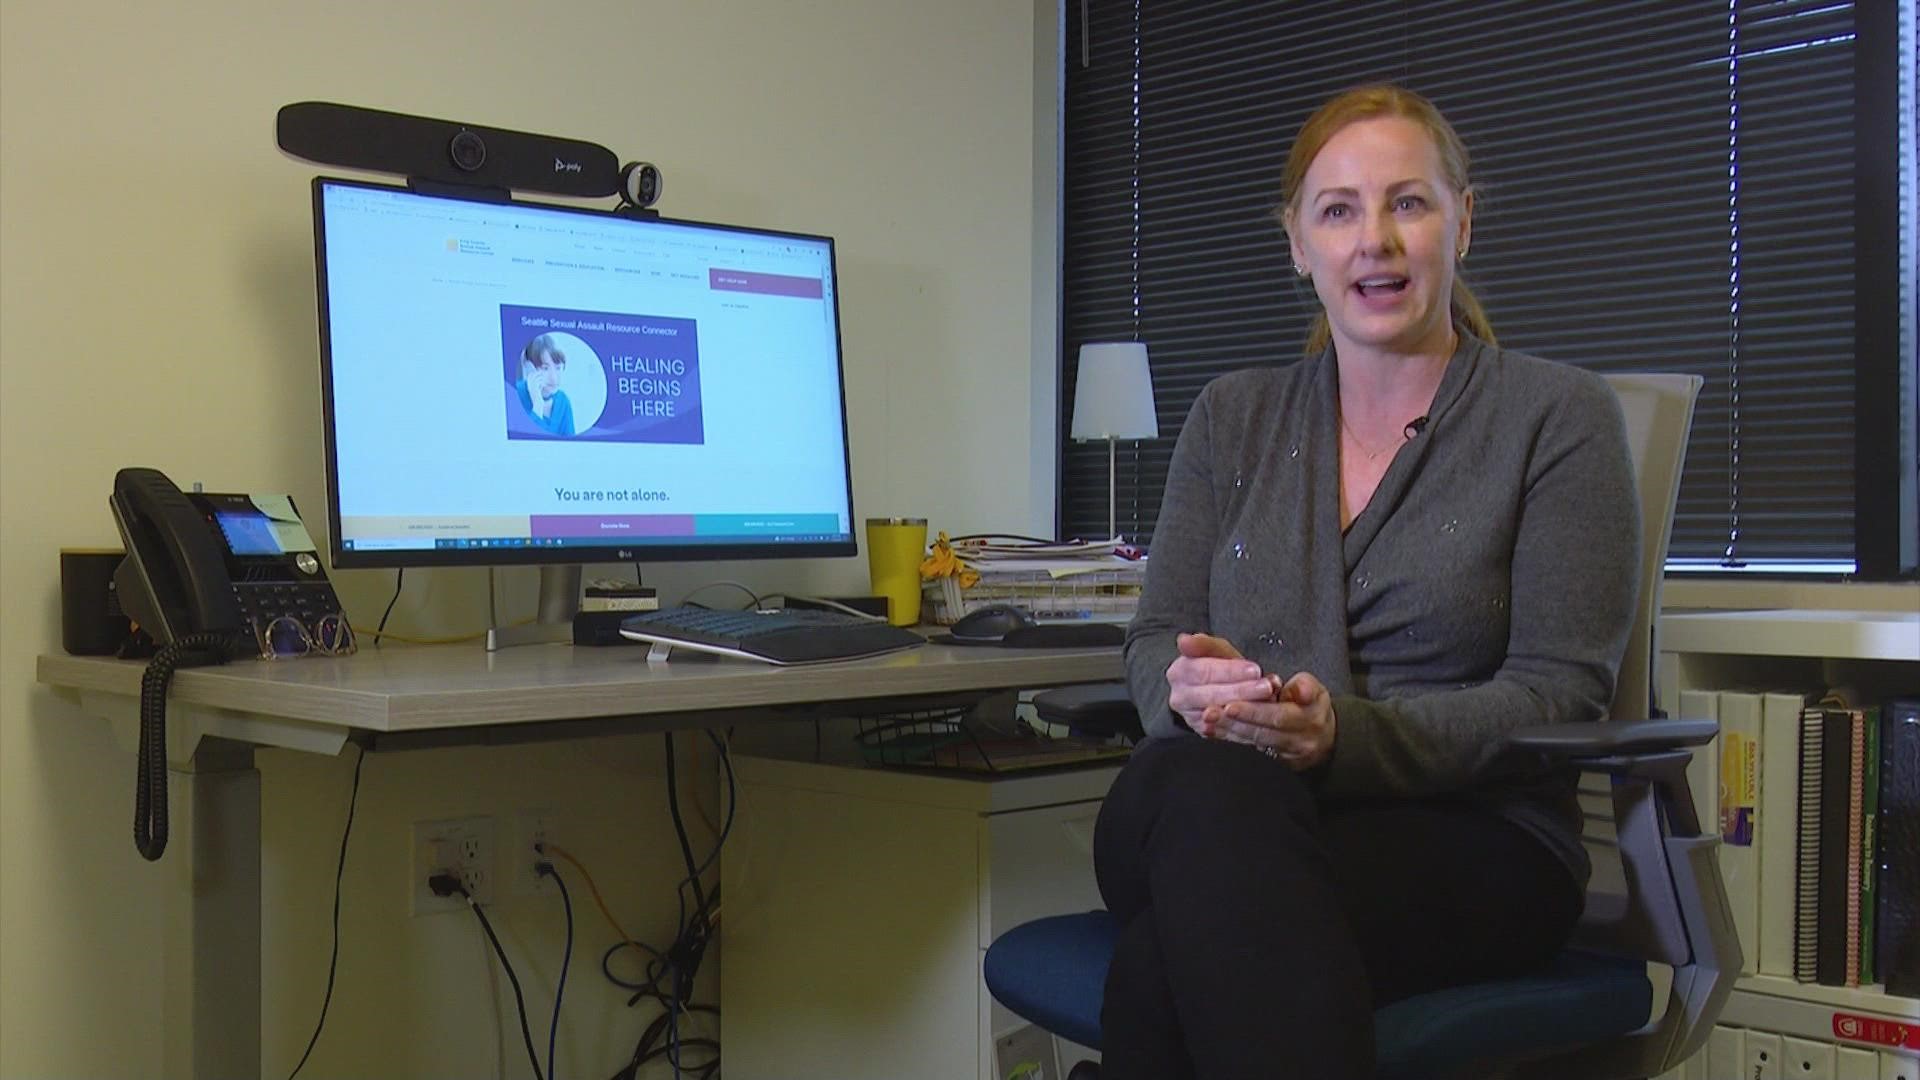 Five different health and advocacy providers came together to launch a new online tool for survivors Wednesday.